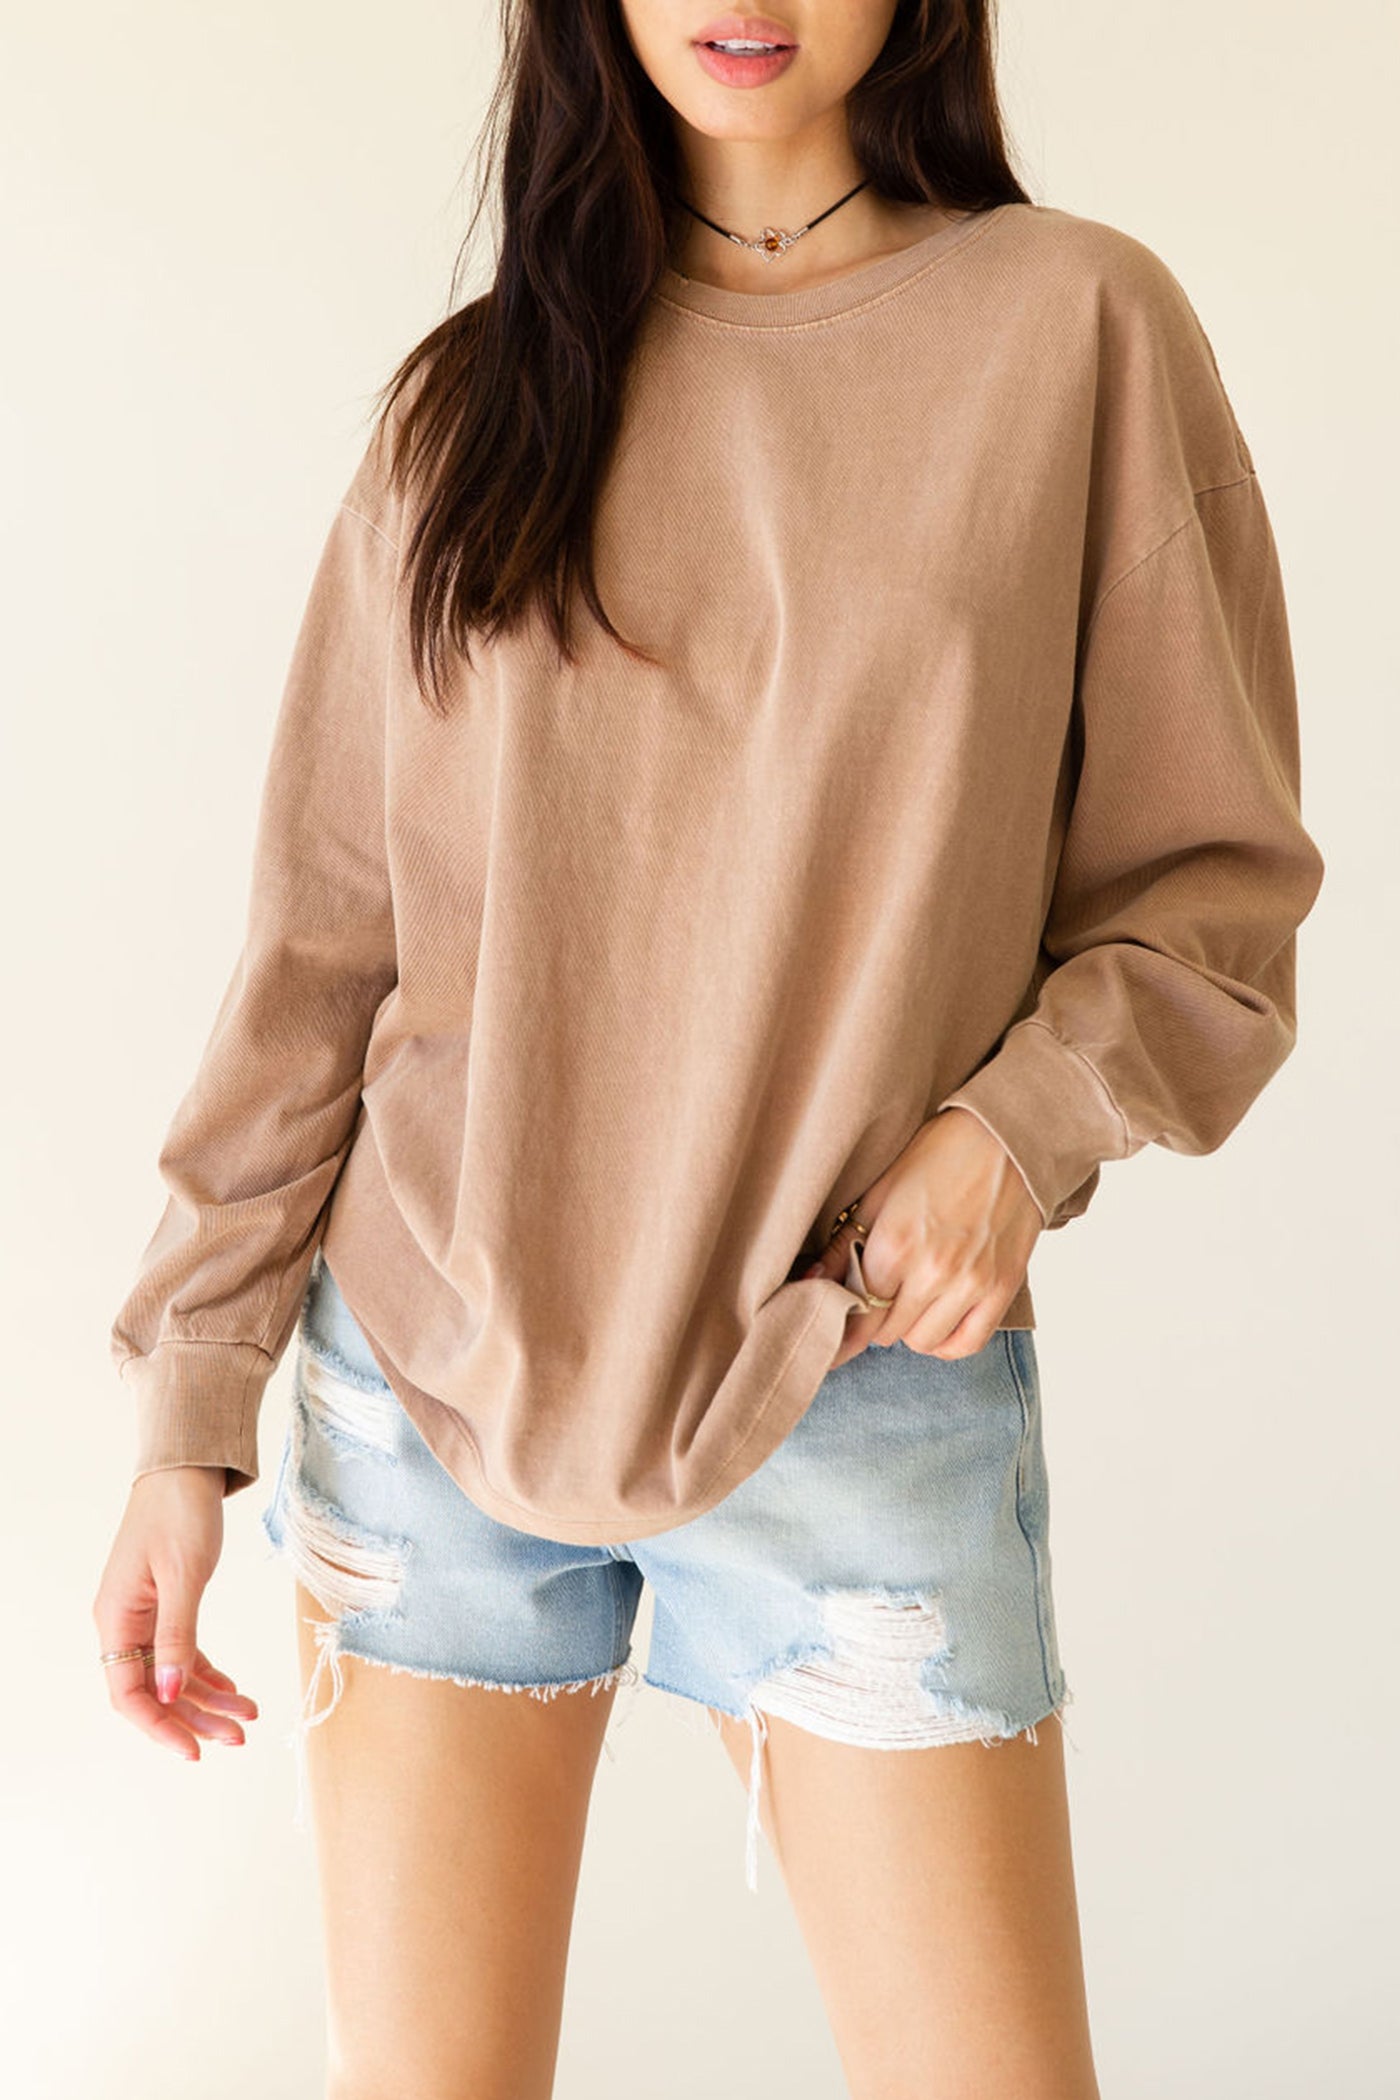 Ends Tonight Oversized Long Sleeve Top